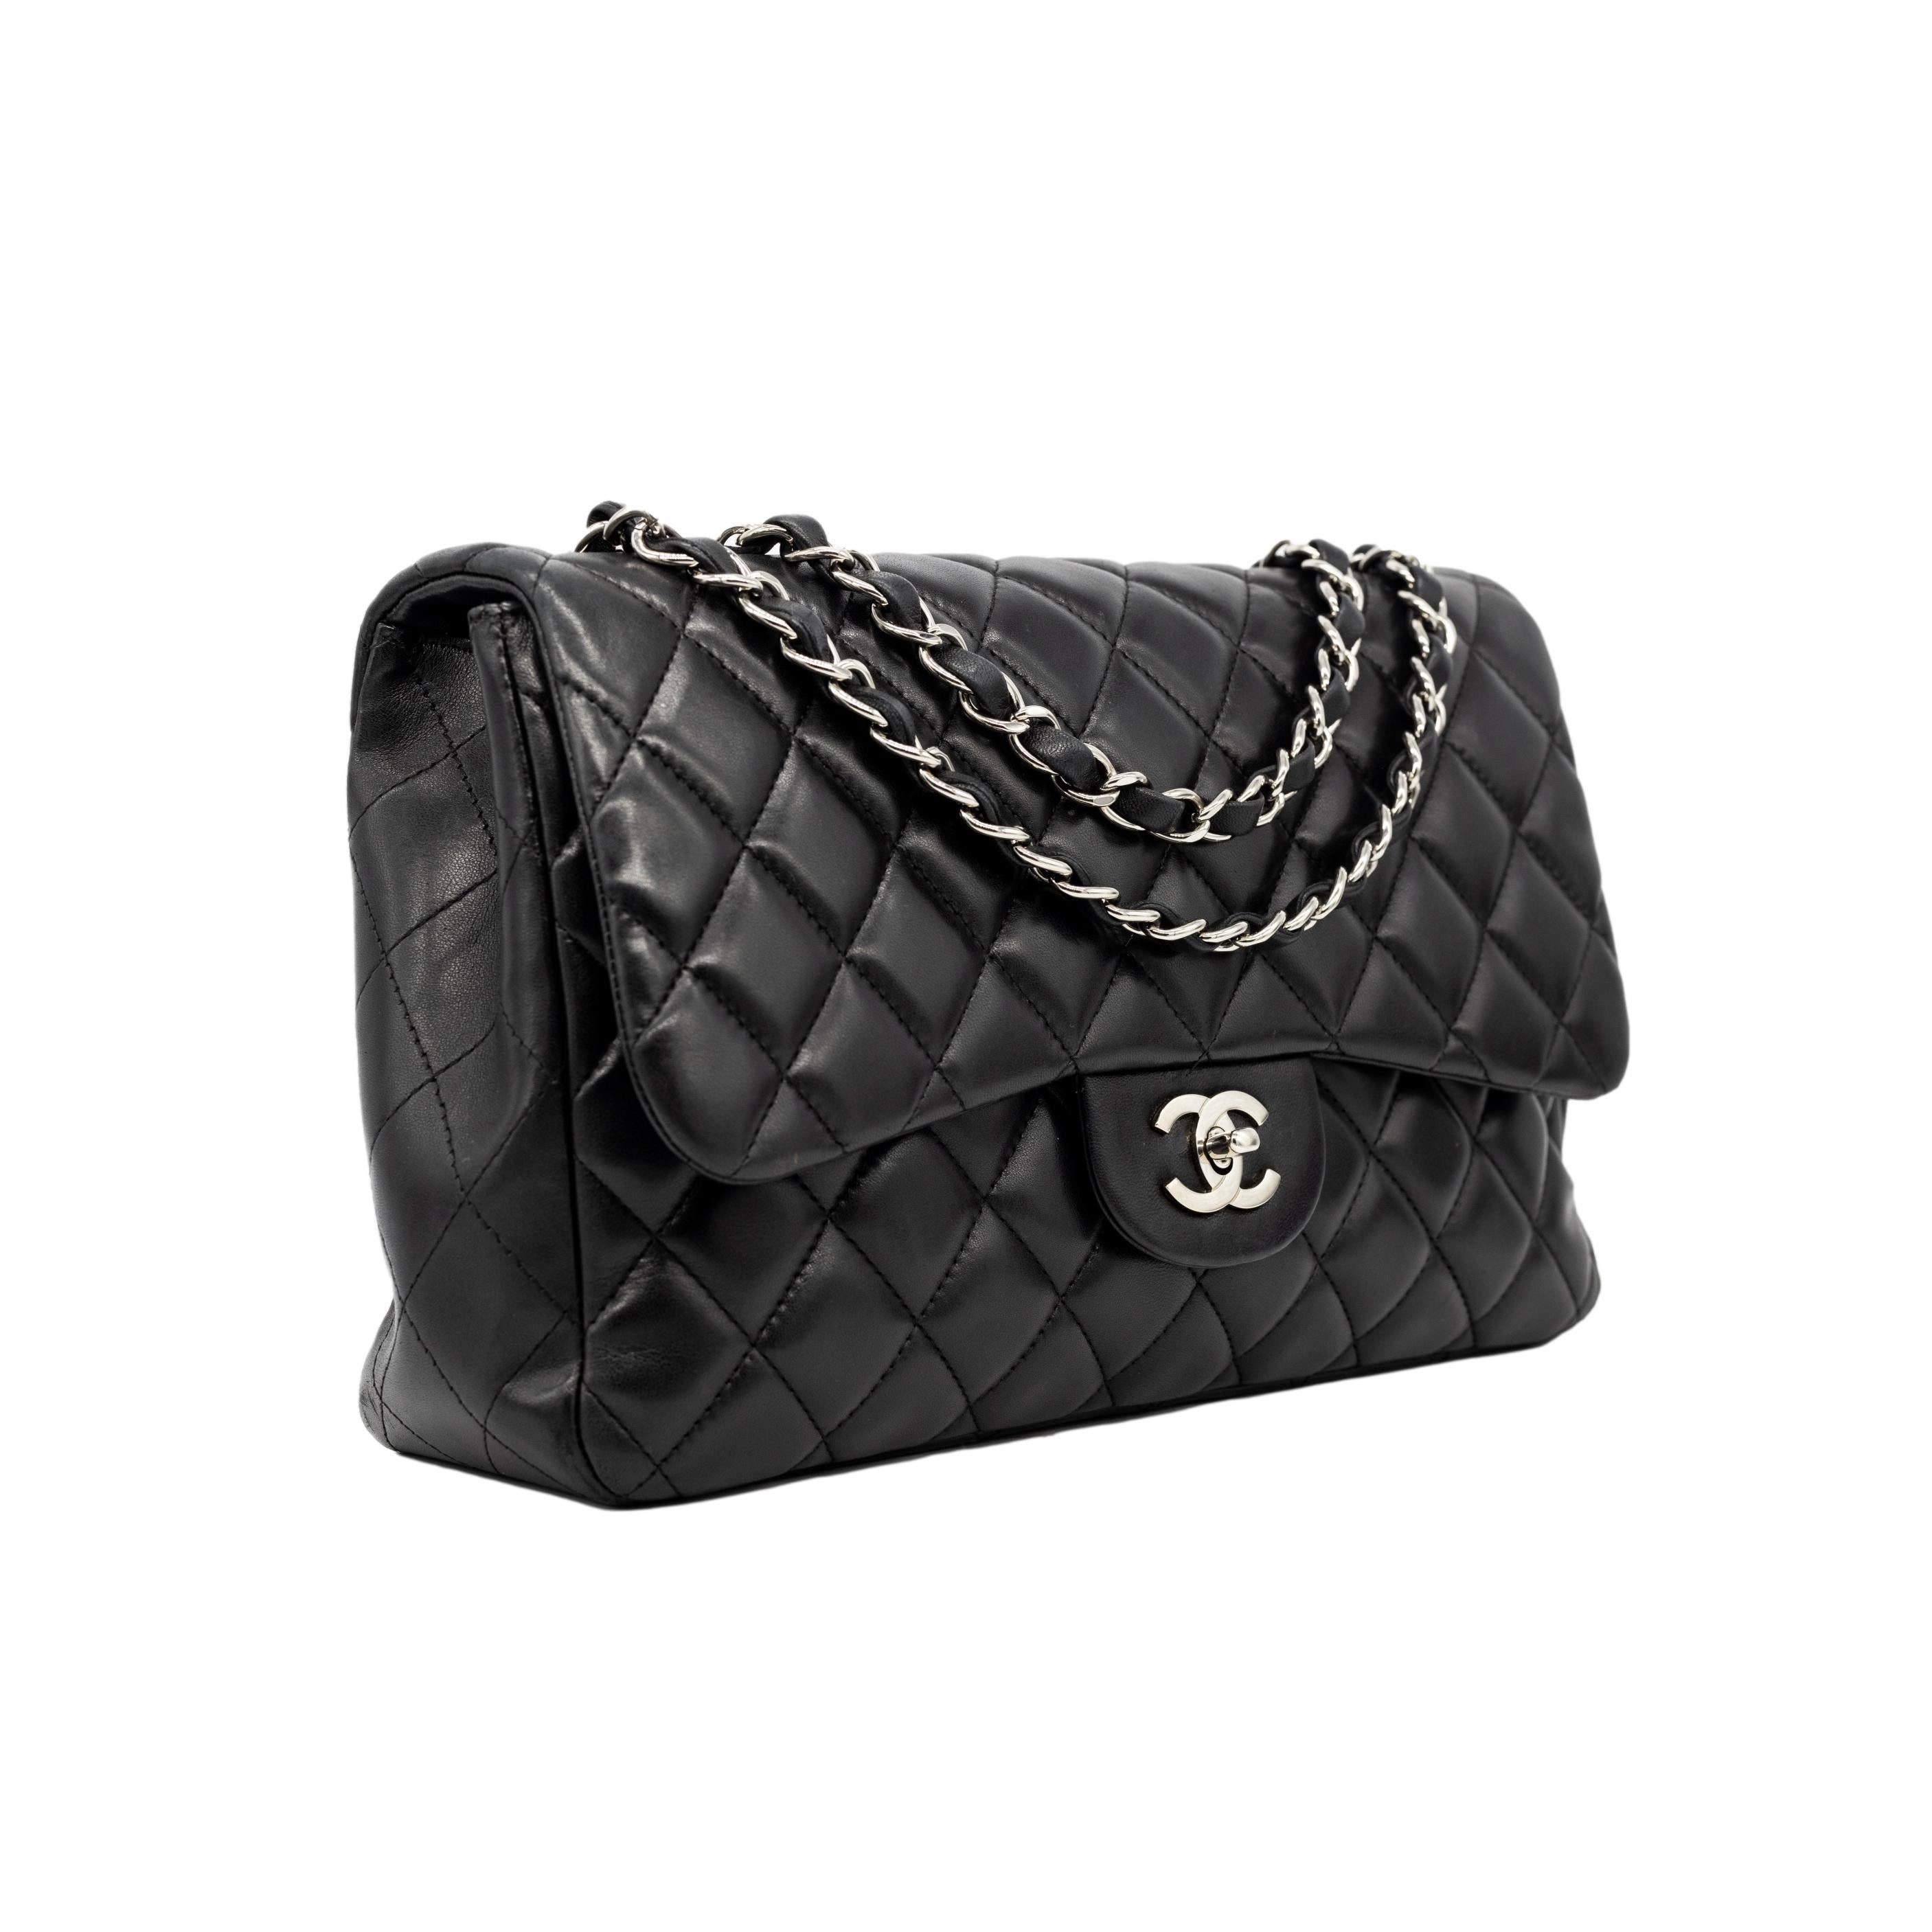 Chanel Timeless Black Jumbo Single Flap Quilted Lambskin Shoulder Bag, 2008 - 2009. The iconic Chanel bag was originally issued by Coco Chanel in February 1955 which became the very first socially acceptable shoulder bag for the modern day woman of